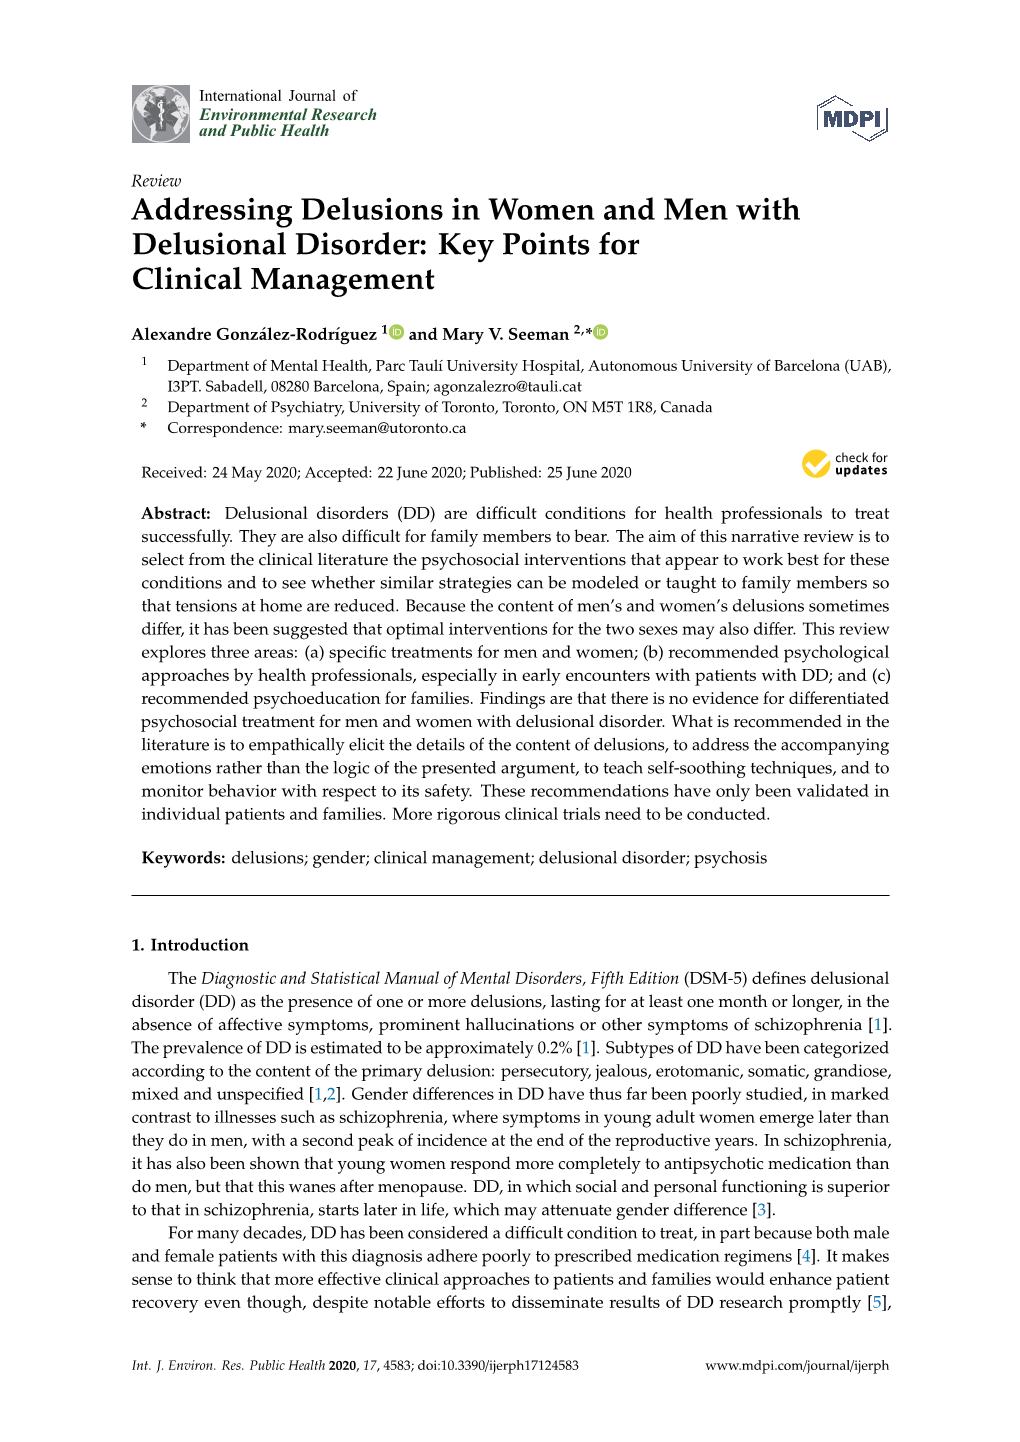 Addressing Delusions in Women and Men with Delusional Disorder: Key Points for Clinical Management